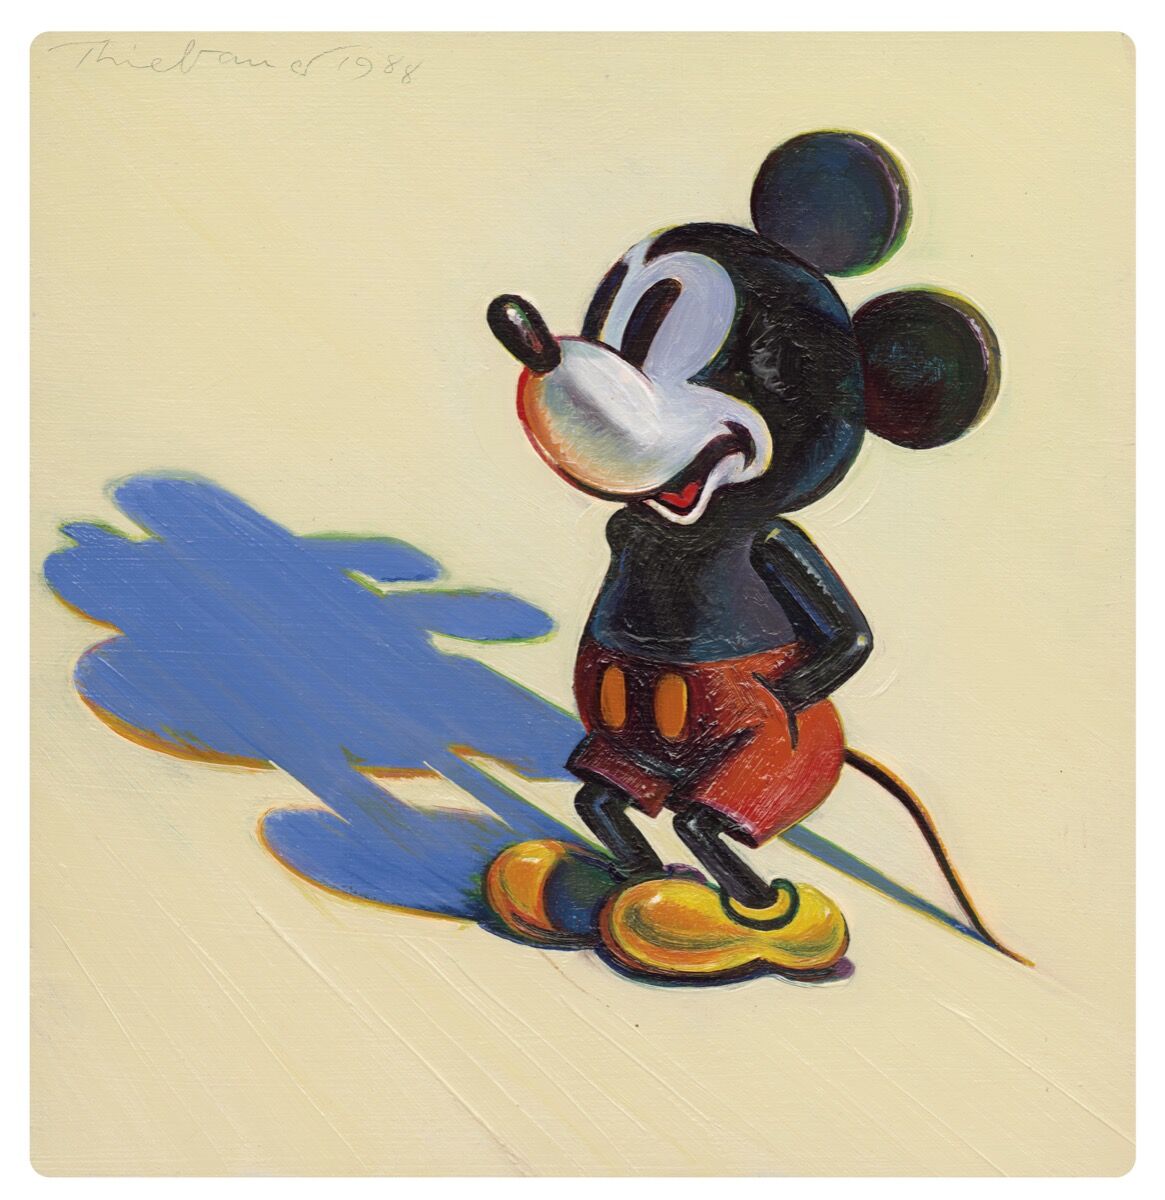 Wayne Thiebaud, Mickey Mouse , 1988. Courtesy of Christie’s.